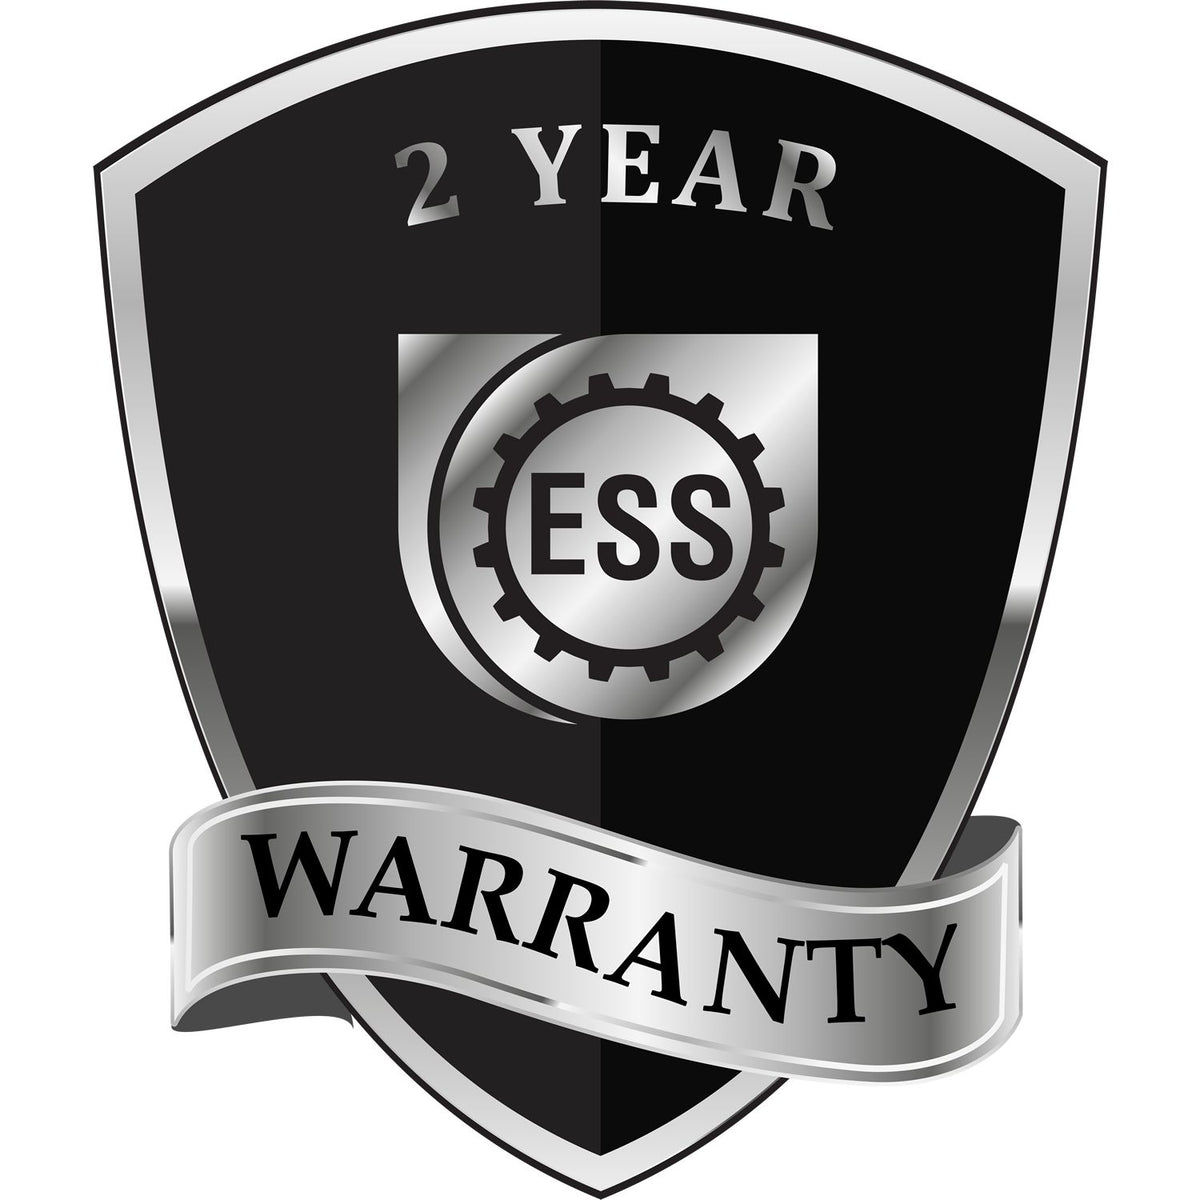 A badge or emblem showing a warranty icon for the Soft Massachusetts Professional Engineer Seal